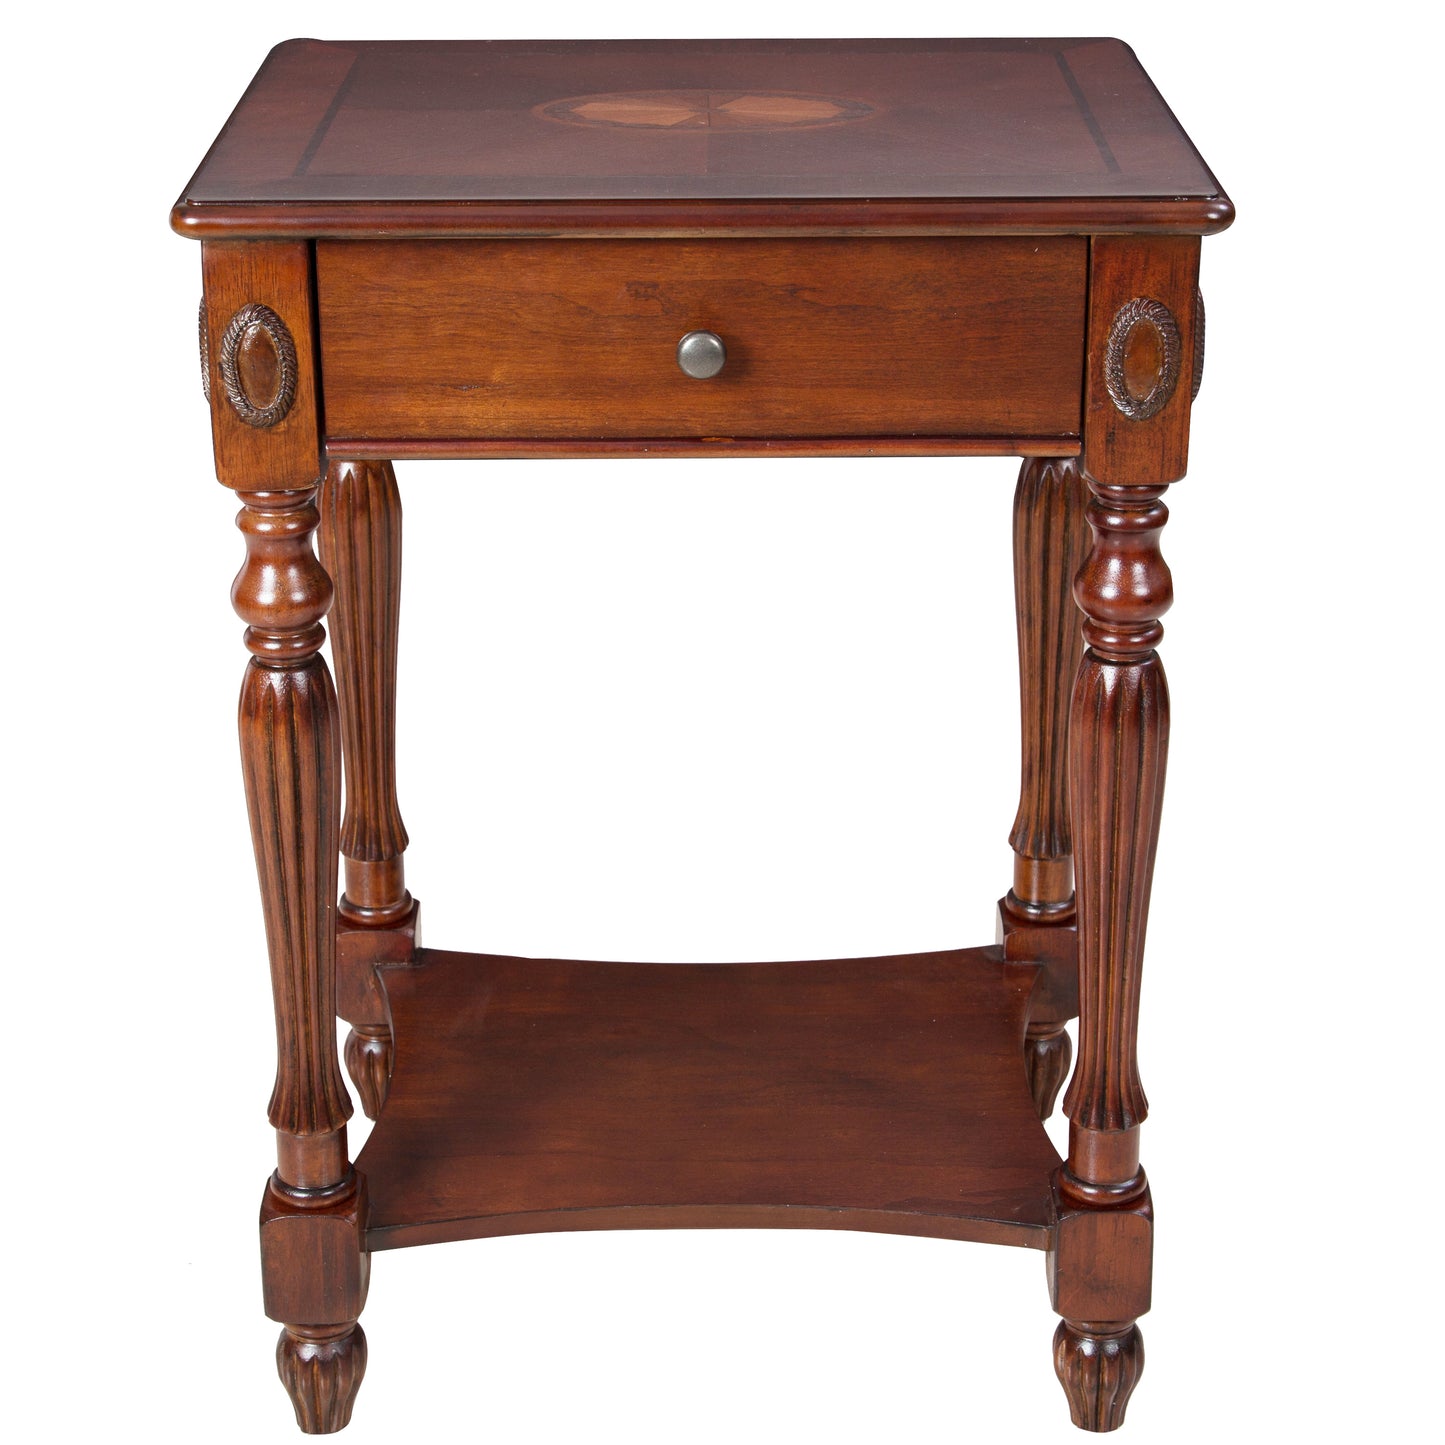 American solid wood square End table with drawer (Cherry)